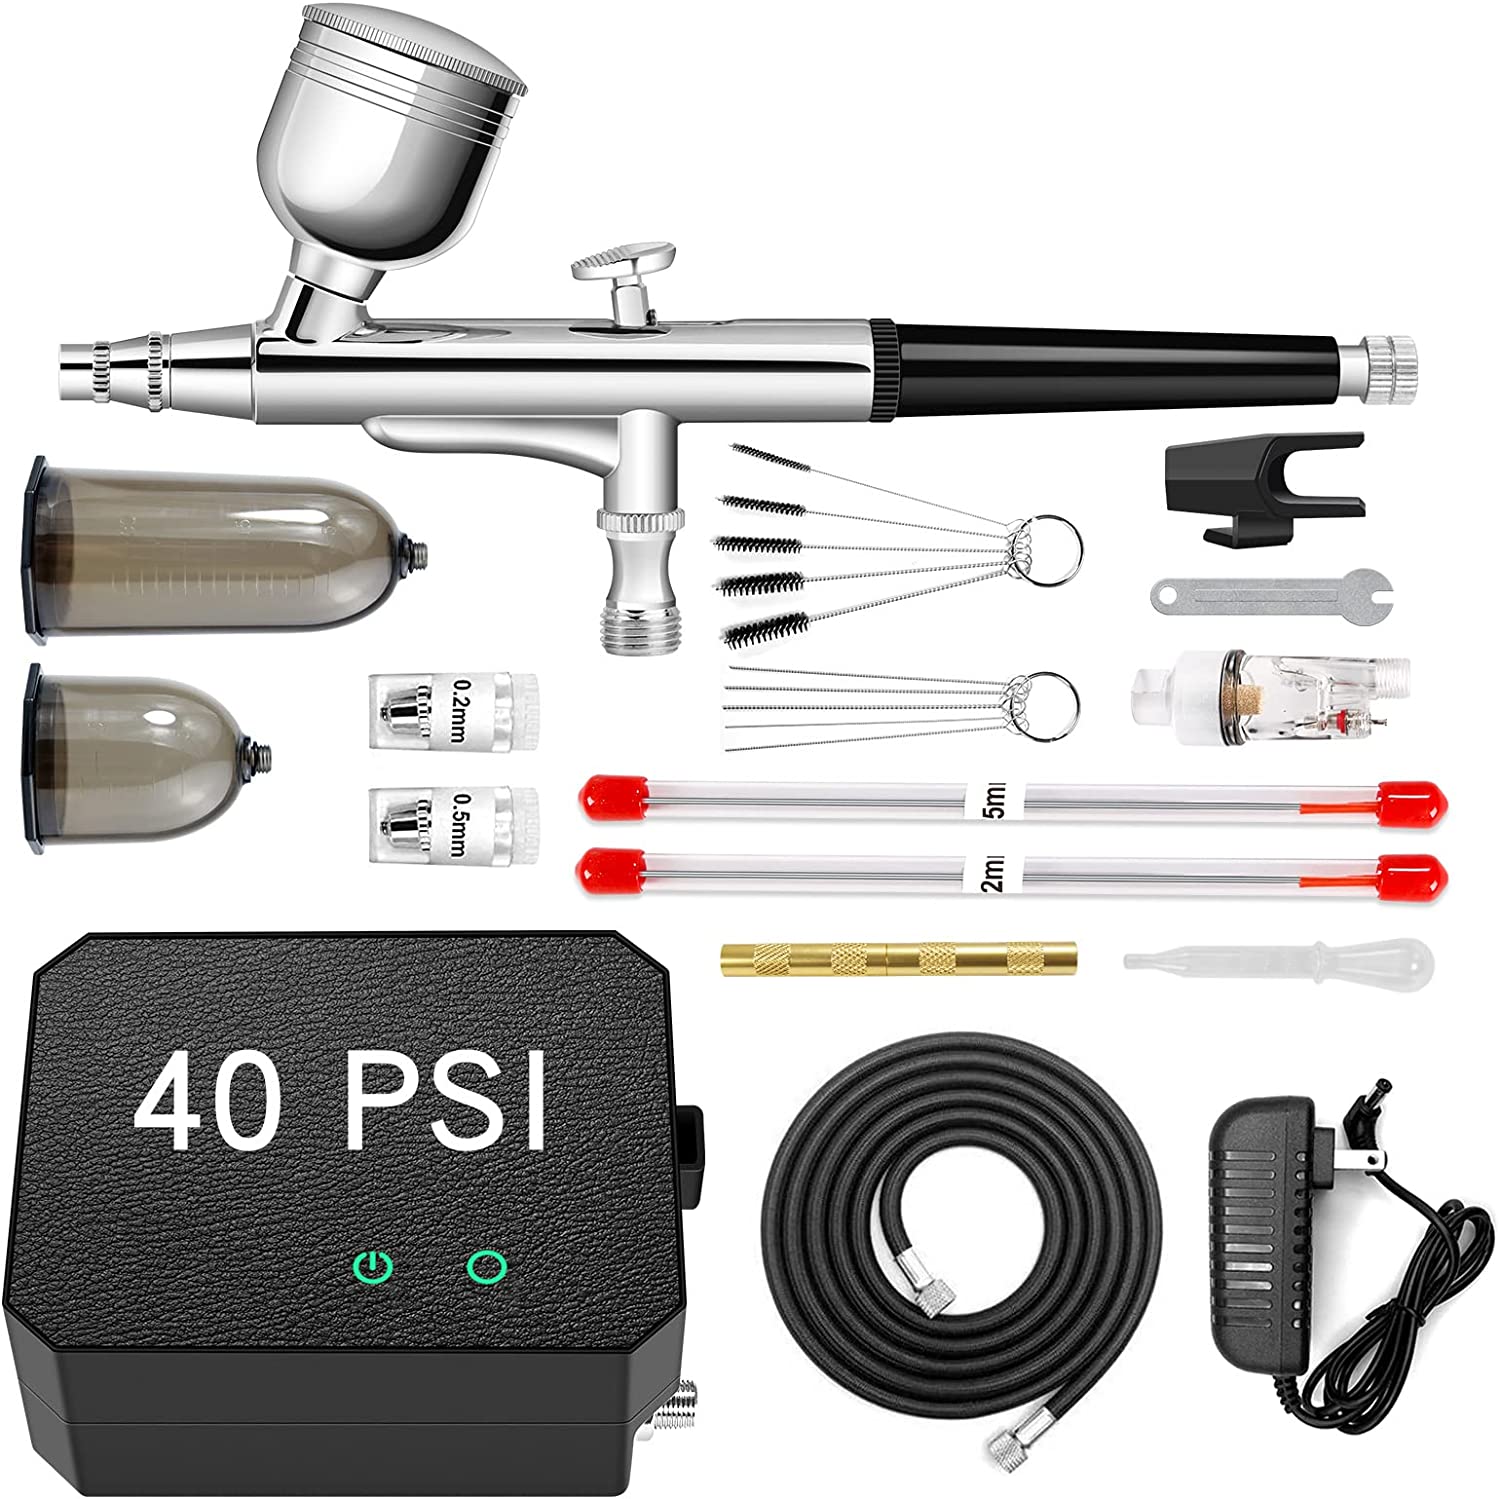 Airbrush Kit with 1/5 HP Air Compressor and 1 Dual Action Airbrush Kit